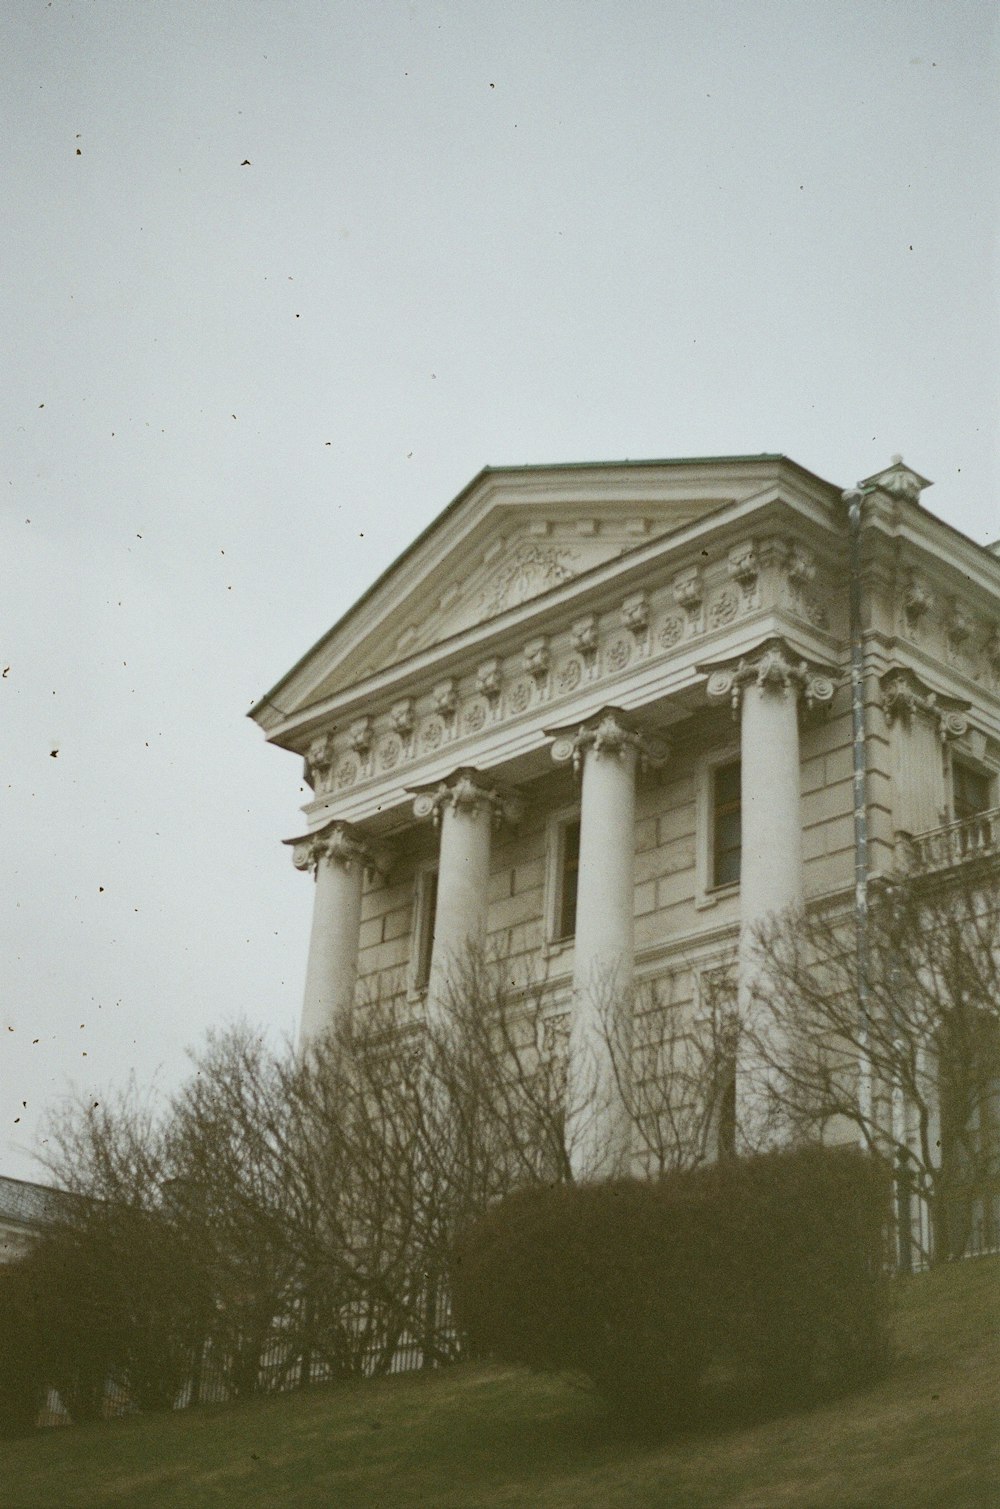 an old building with columns and a clock on the front of it